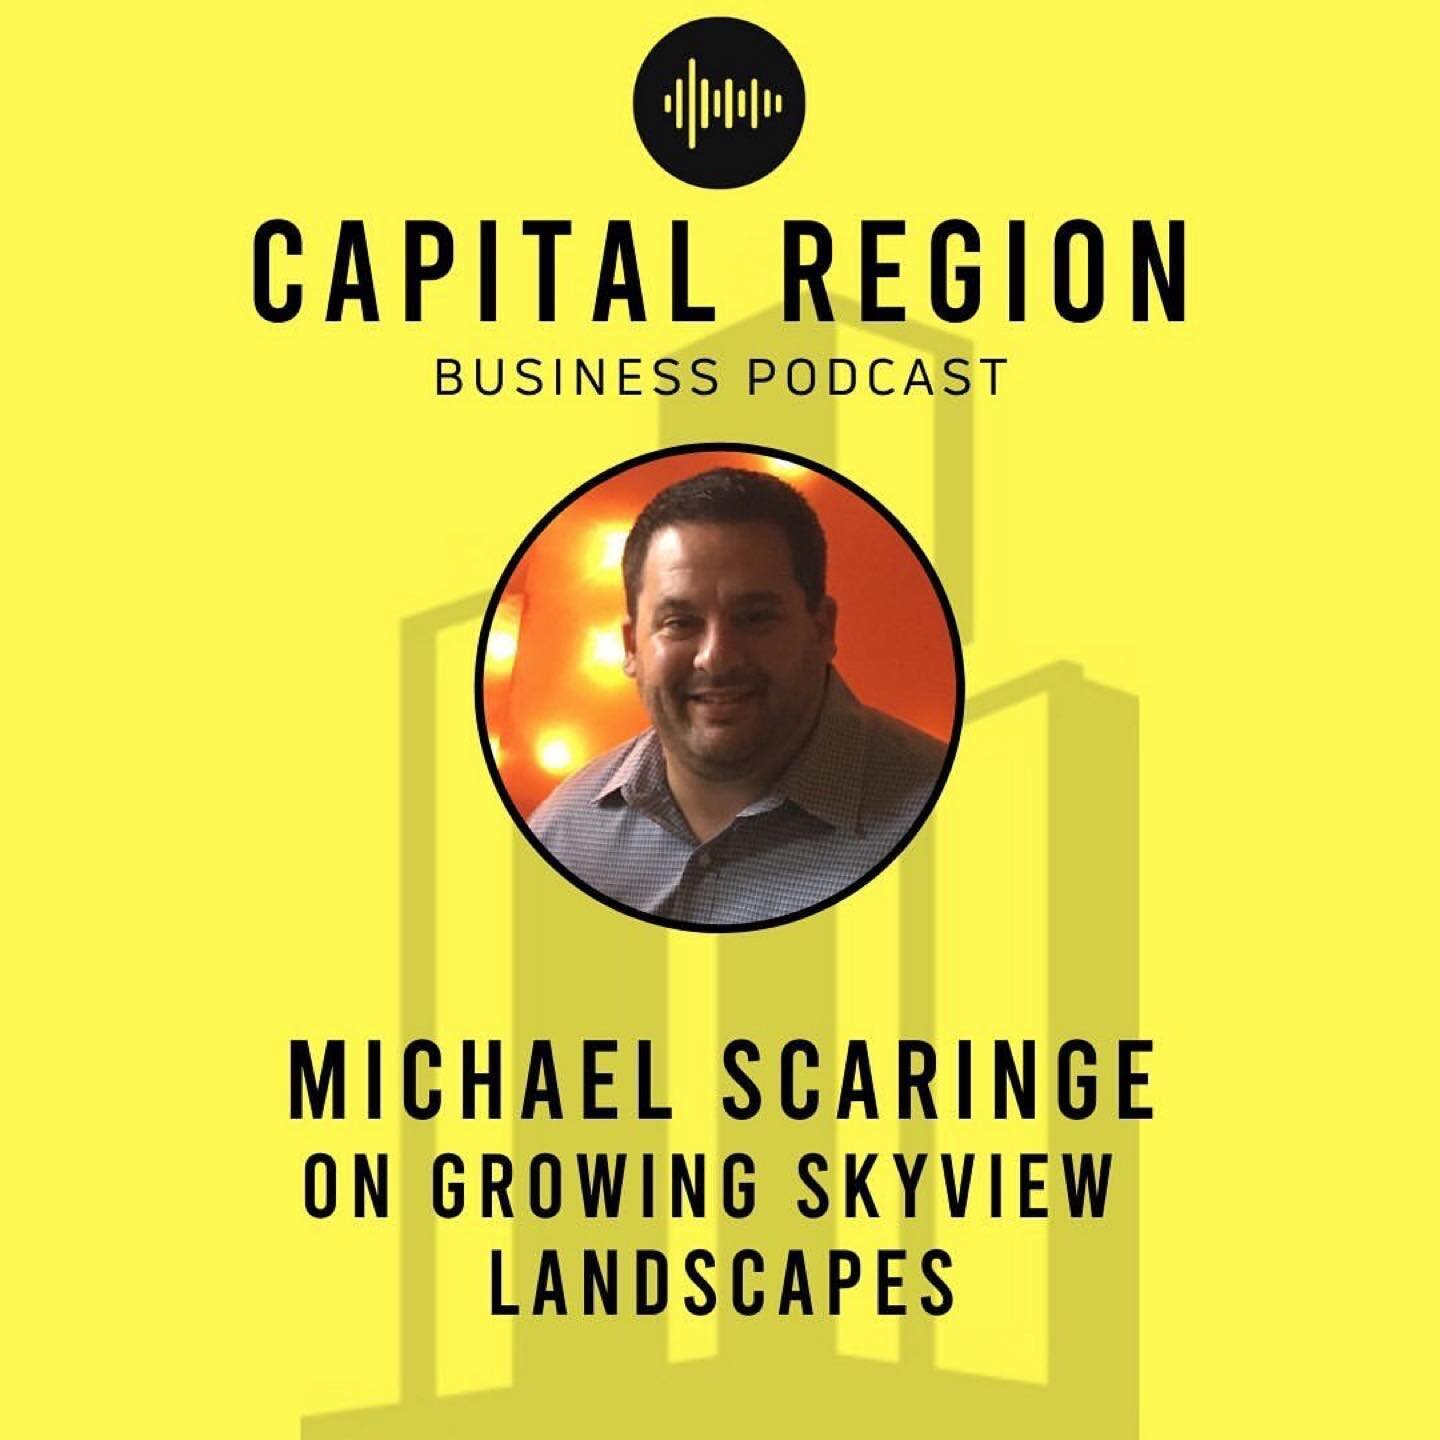 The Skyview Landscape President &amp; Owner, Michael Scaringe, had the honor of sitting down with the Capital Region Business Podcast to discuss how he got started, changes in the landscaping industry over the past 10 years, the evolution of &ldquo;o